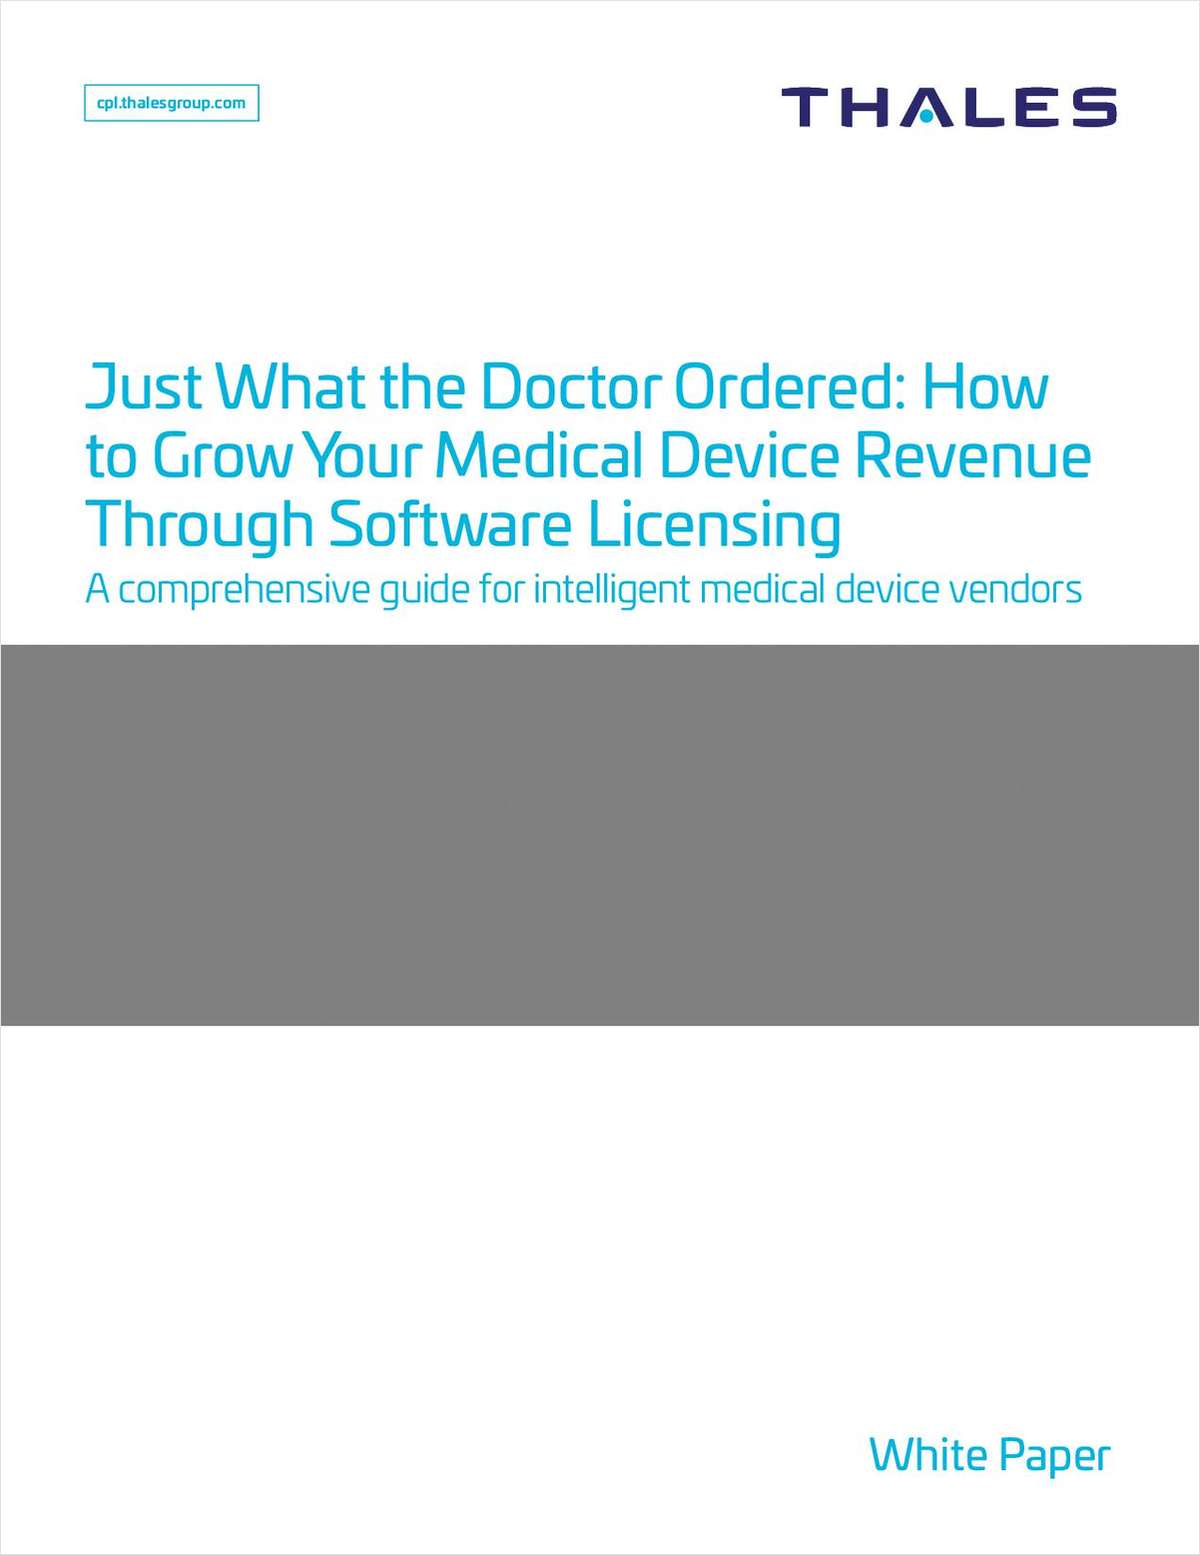 Just What the Doctor Ordered! How to Grow Your Medical Device Revenue Through Software Licensing